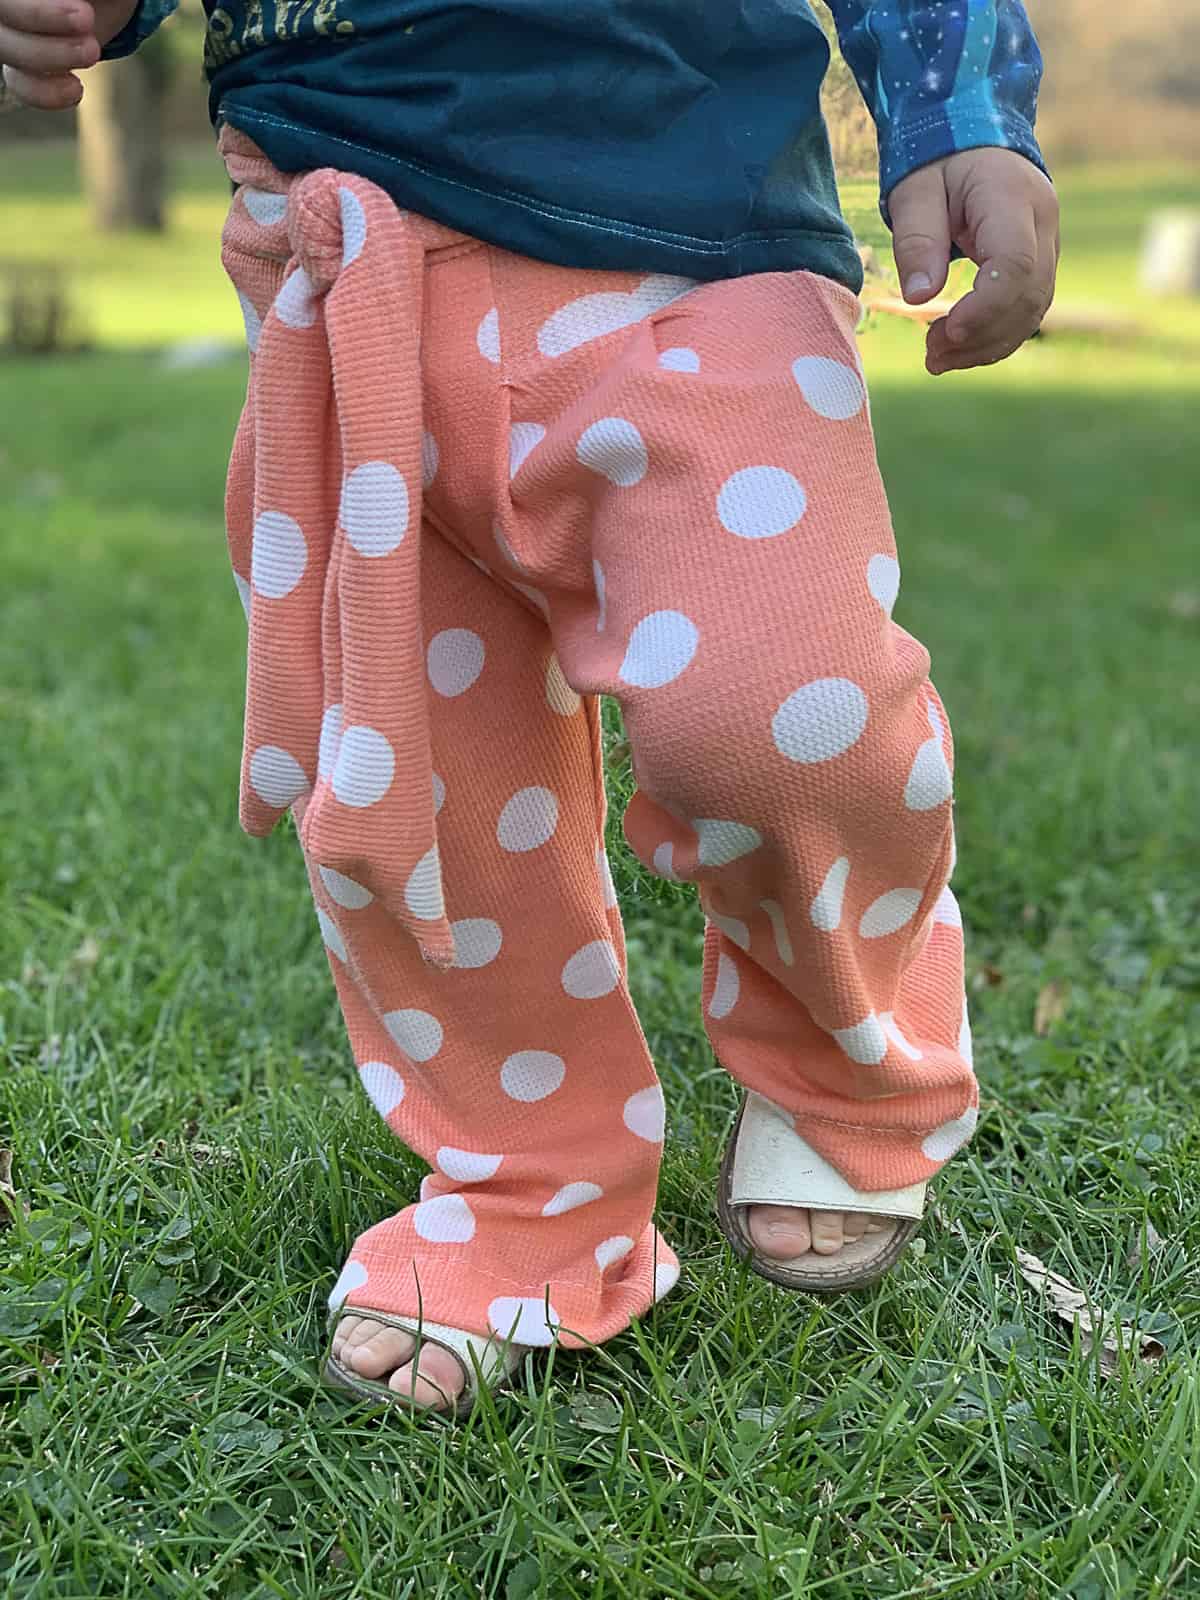 Free Ruffle Pant Pattern for Girls - Sew Crafty Me